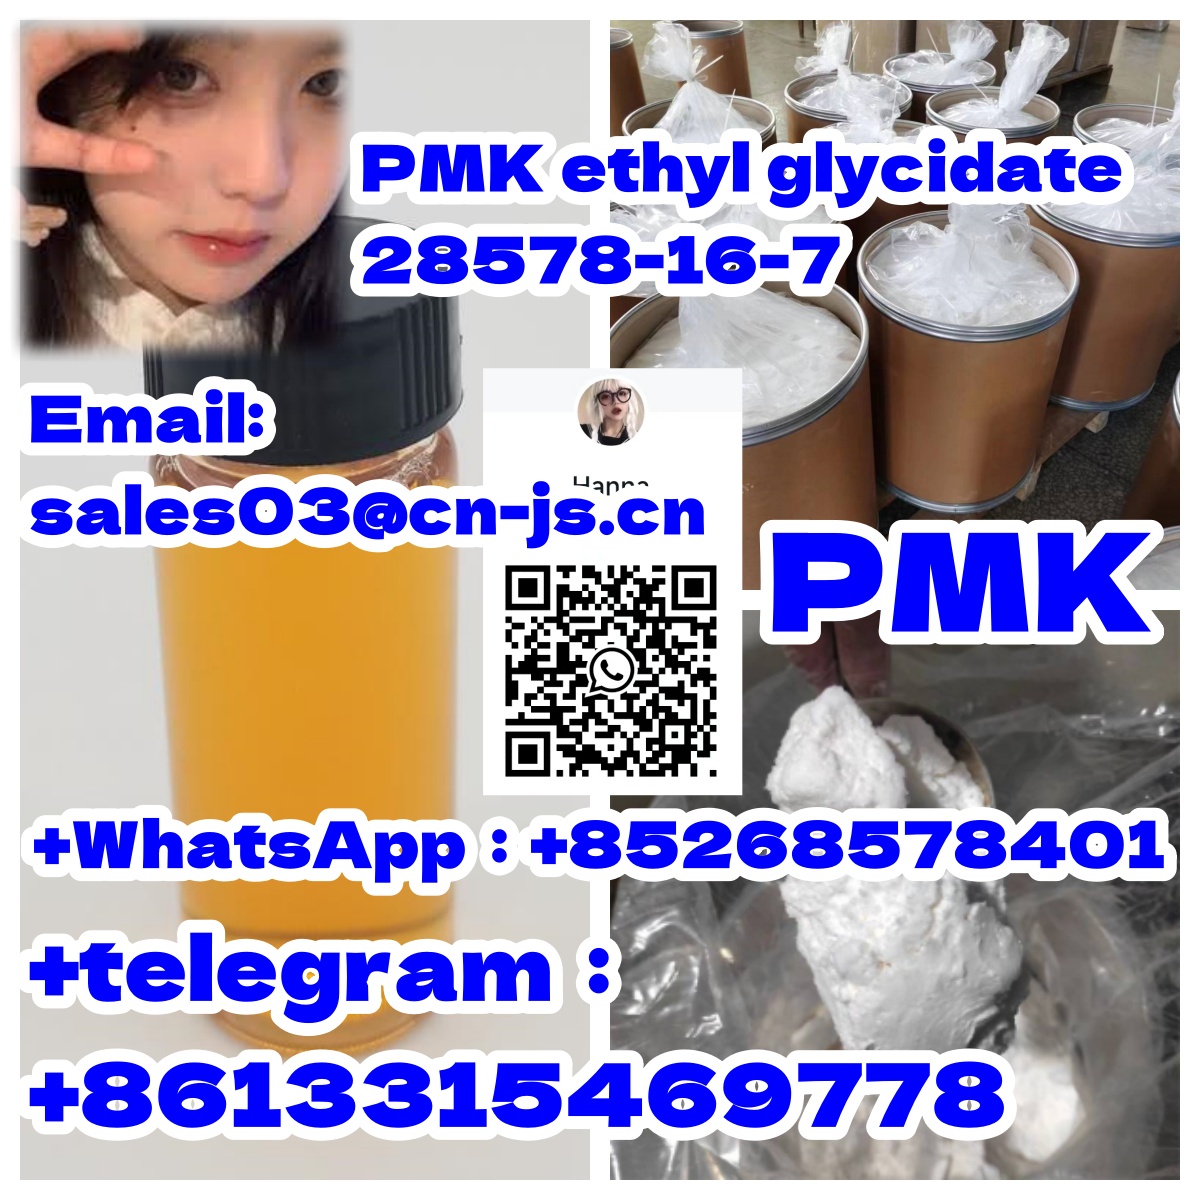 PM-K oi.l C^AS 285/78-16-7 P-MK et.h+yl gl-y+ci.dat/e,Shijiazhuang,Services,Health & Beauty,77traders